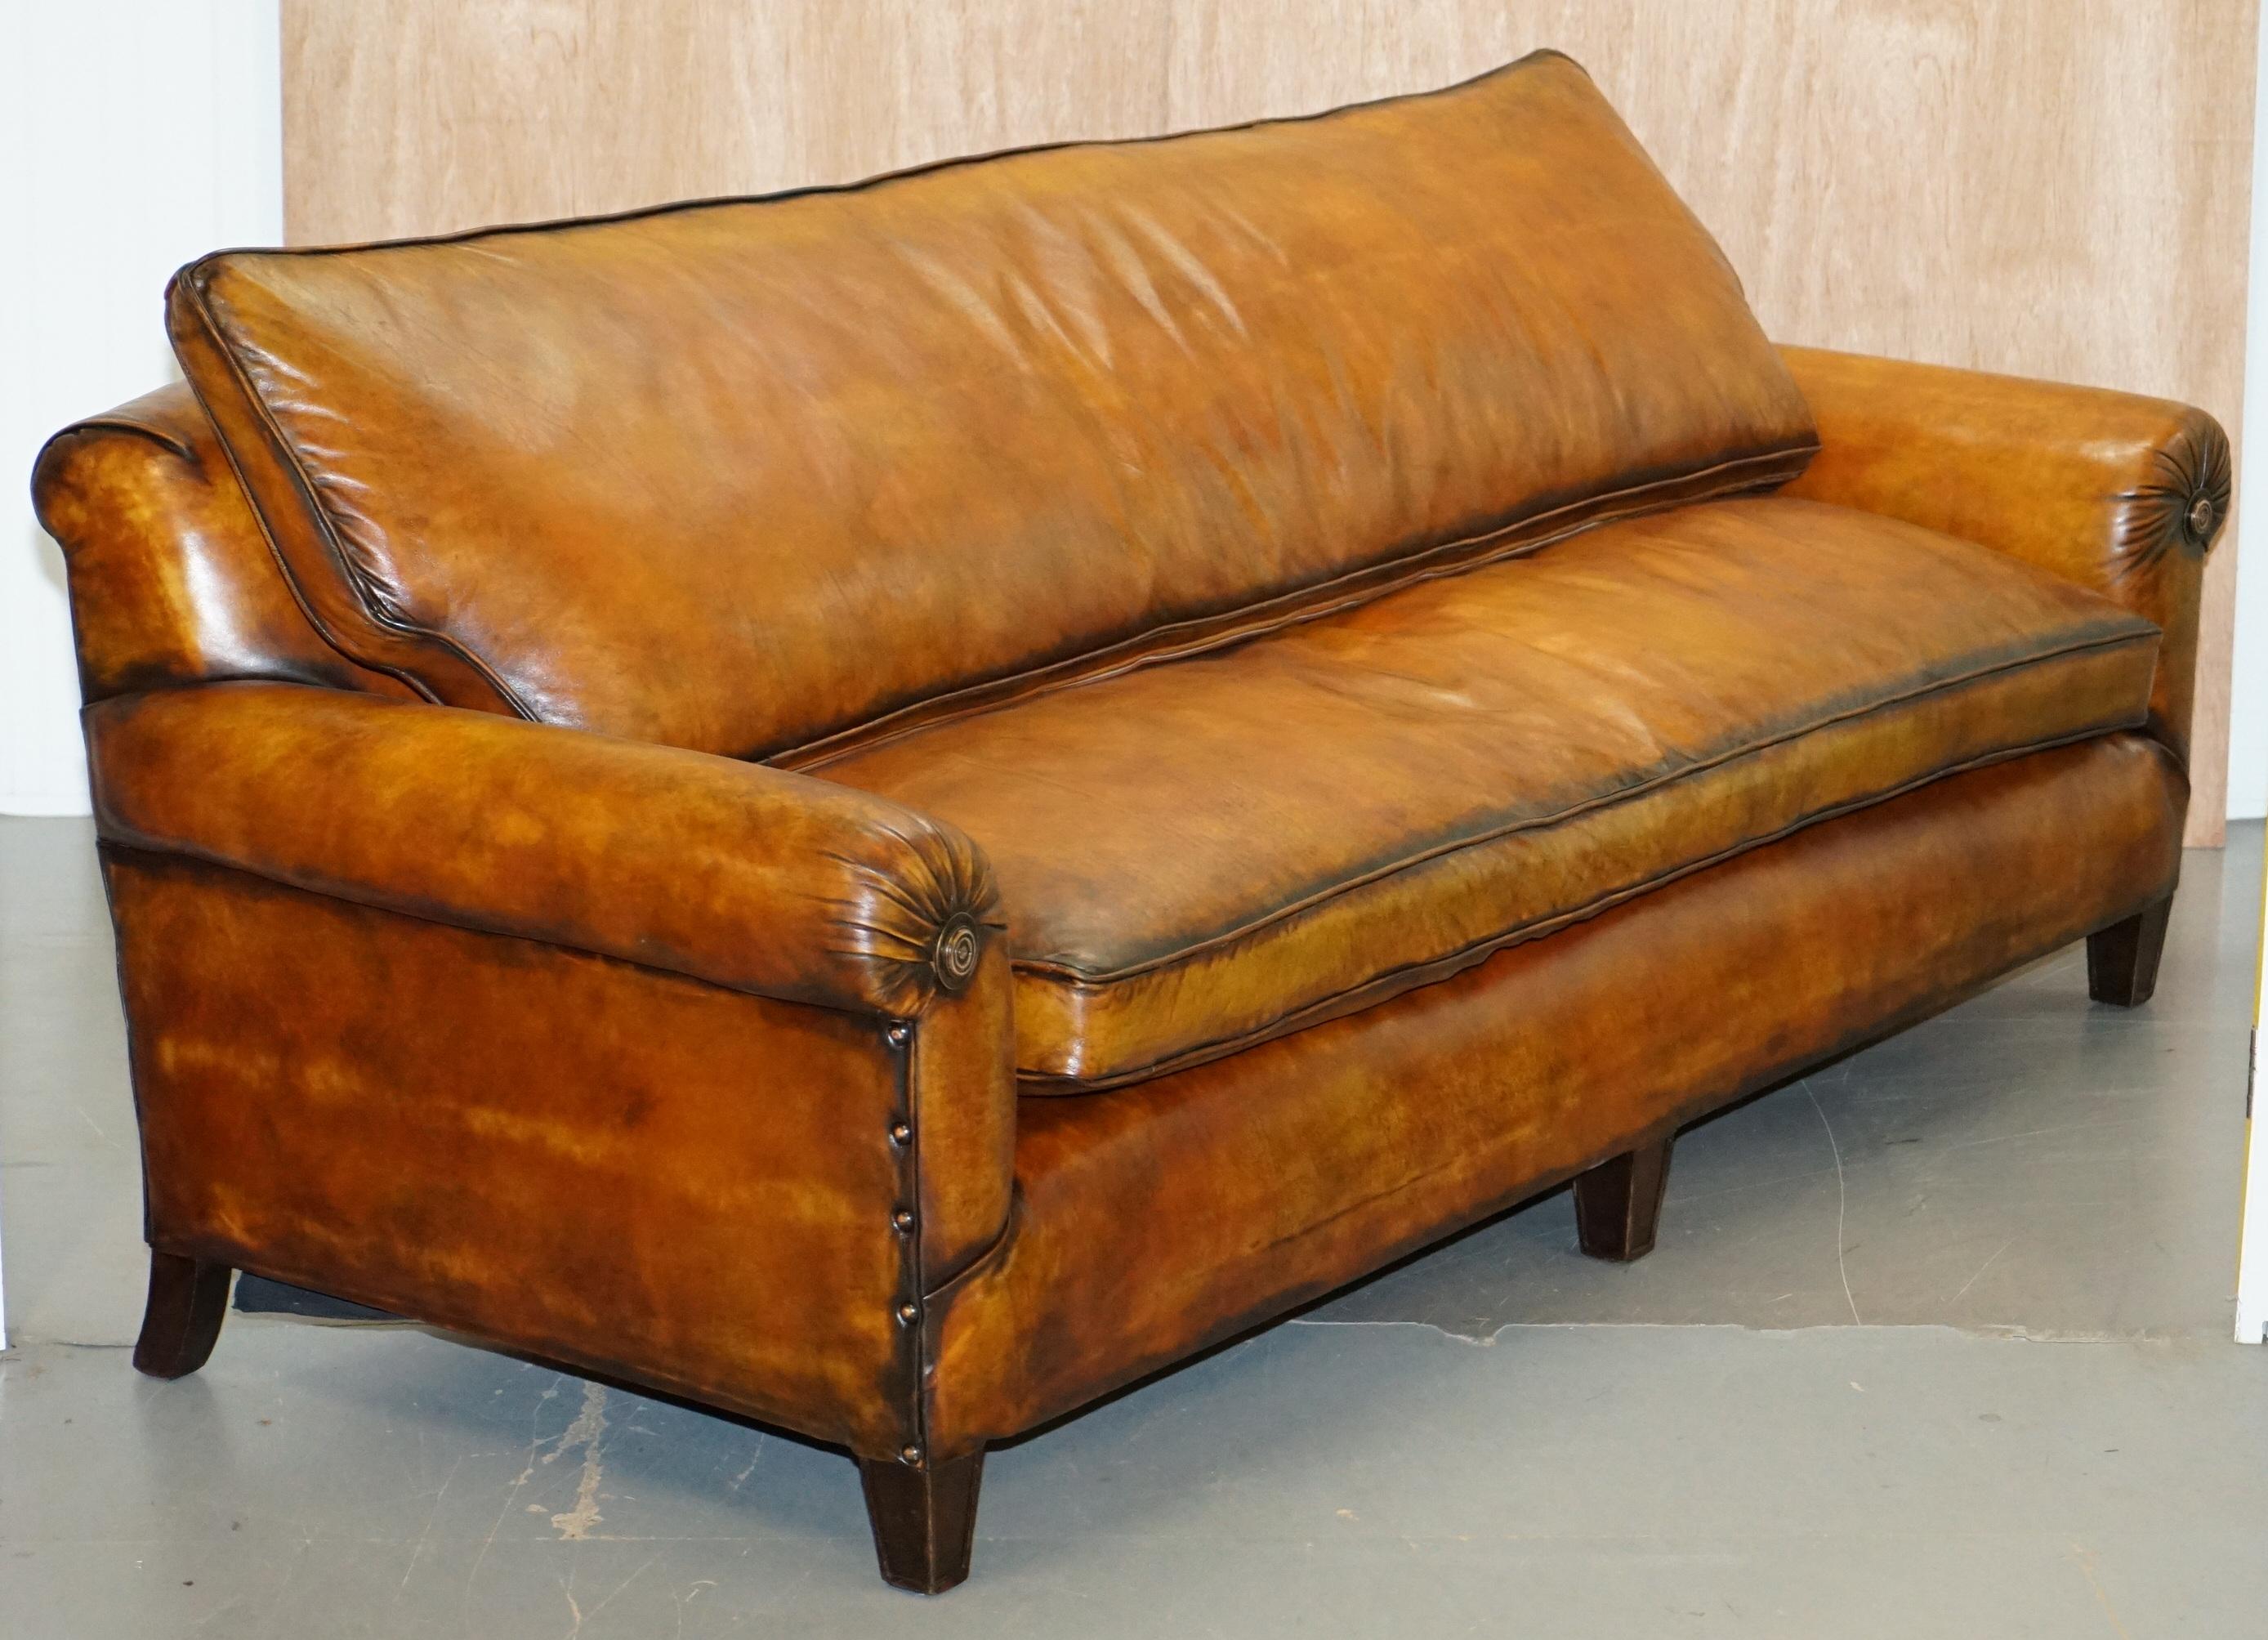 We are delighted to offer for sale this absolutely exceptional, fully restored, very rare original Victorian sofa with coil sprung front edge and feather filled cushions throughout

This is one of the most comfortable and finest hand made in